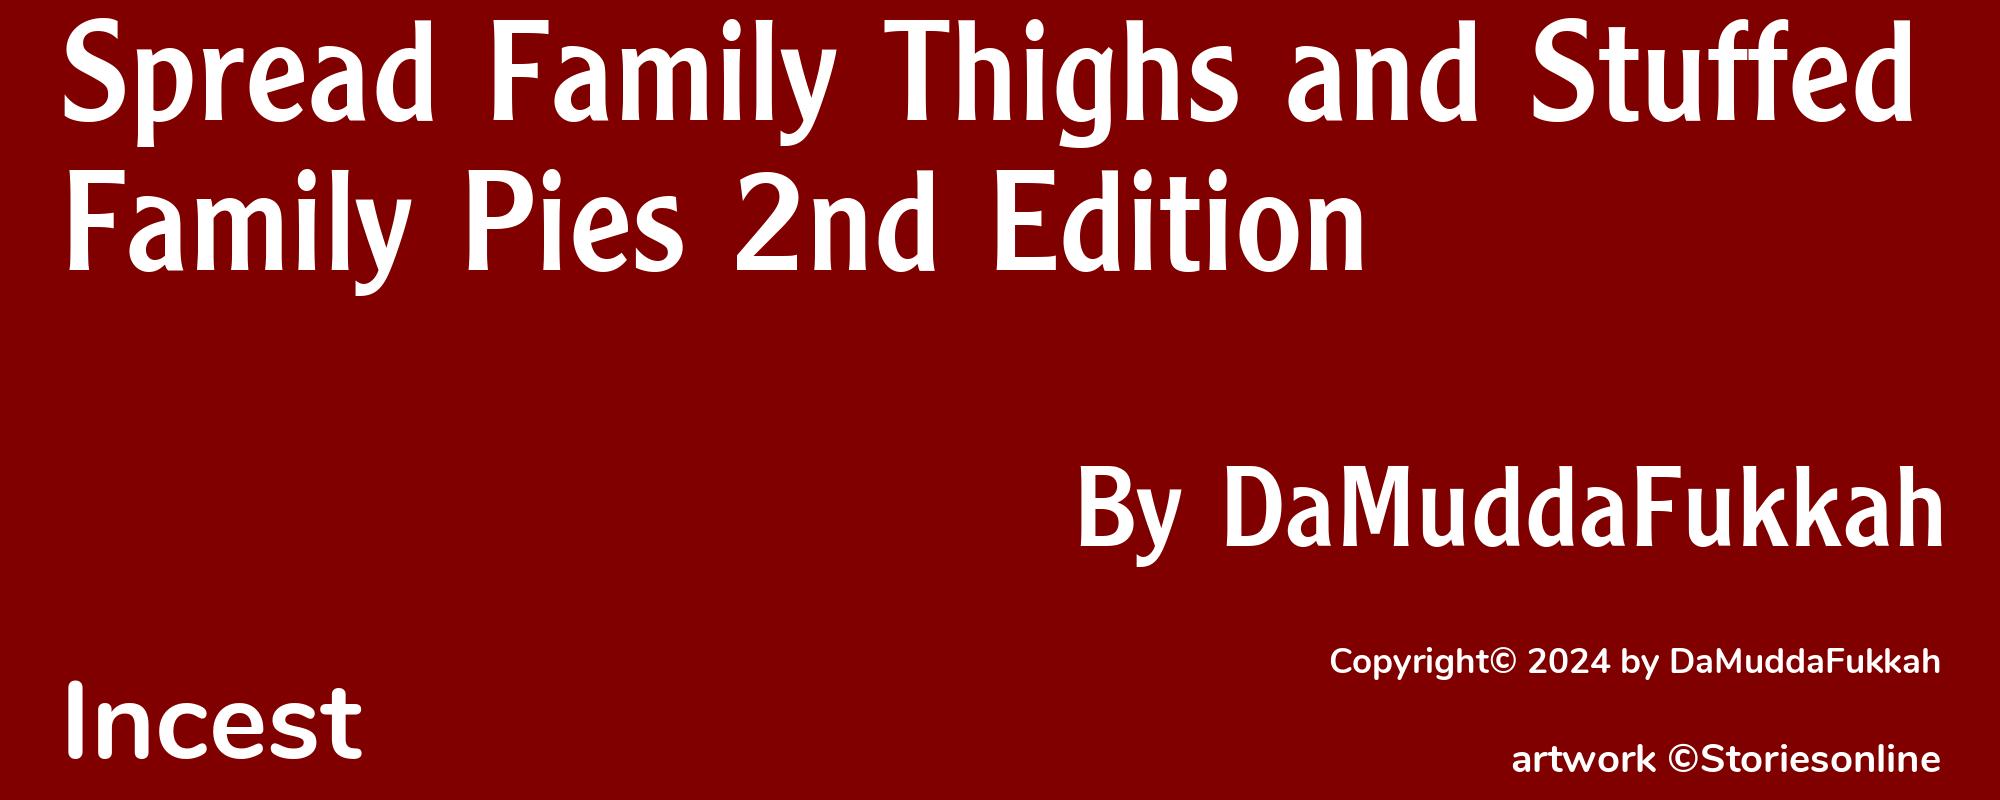 Spread Family Thighs and Stuffed Family Pies 2nd Edition - Cover